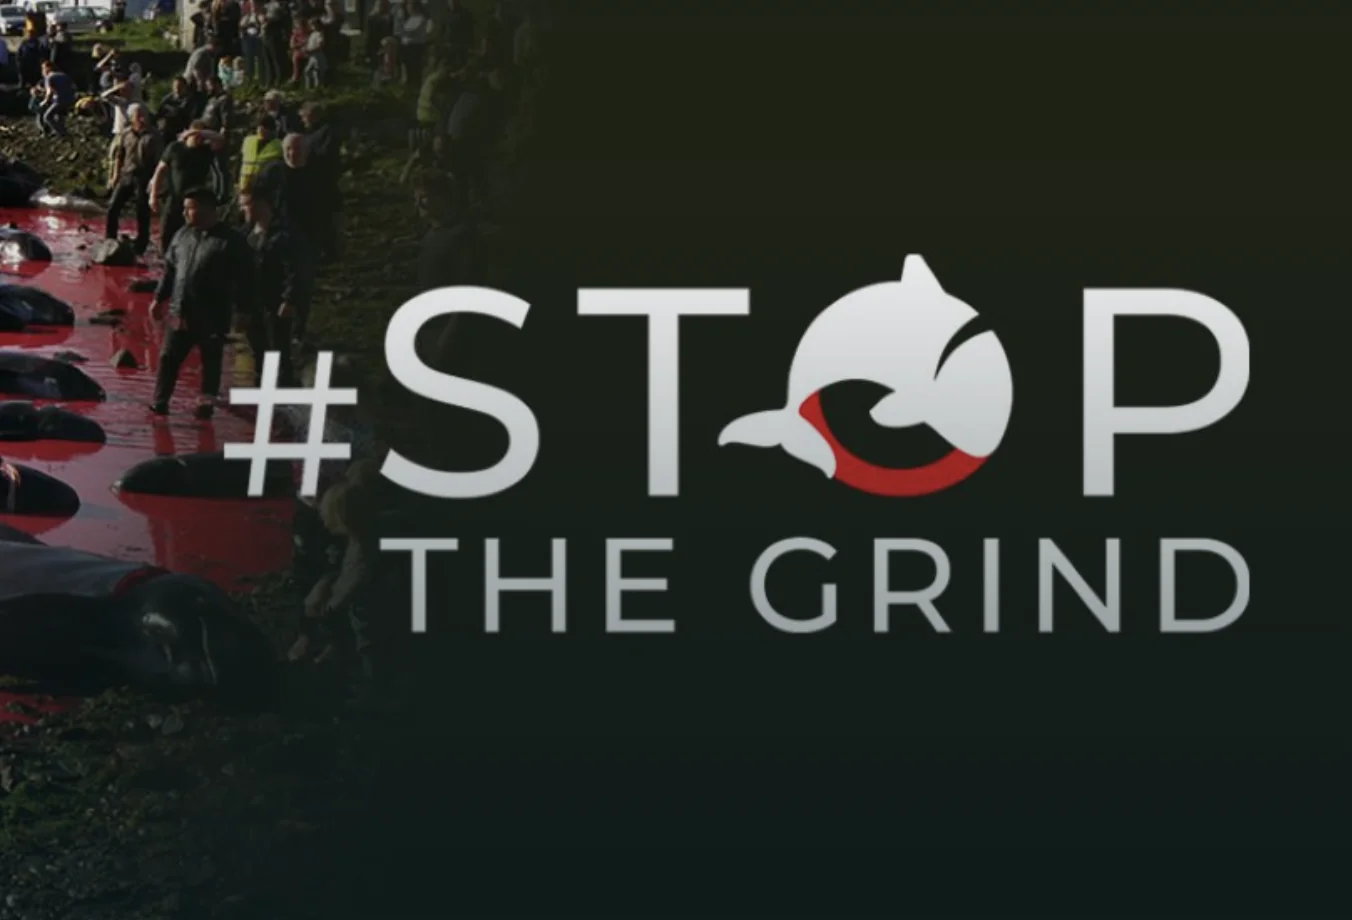 Stop the Grind coalition logo with corpses of cetaceans in bloody waters in the background.